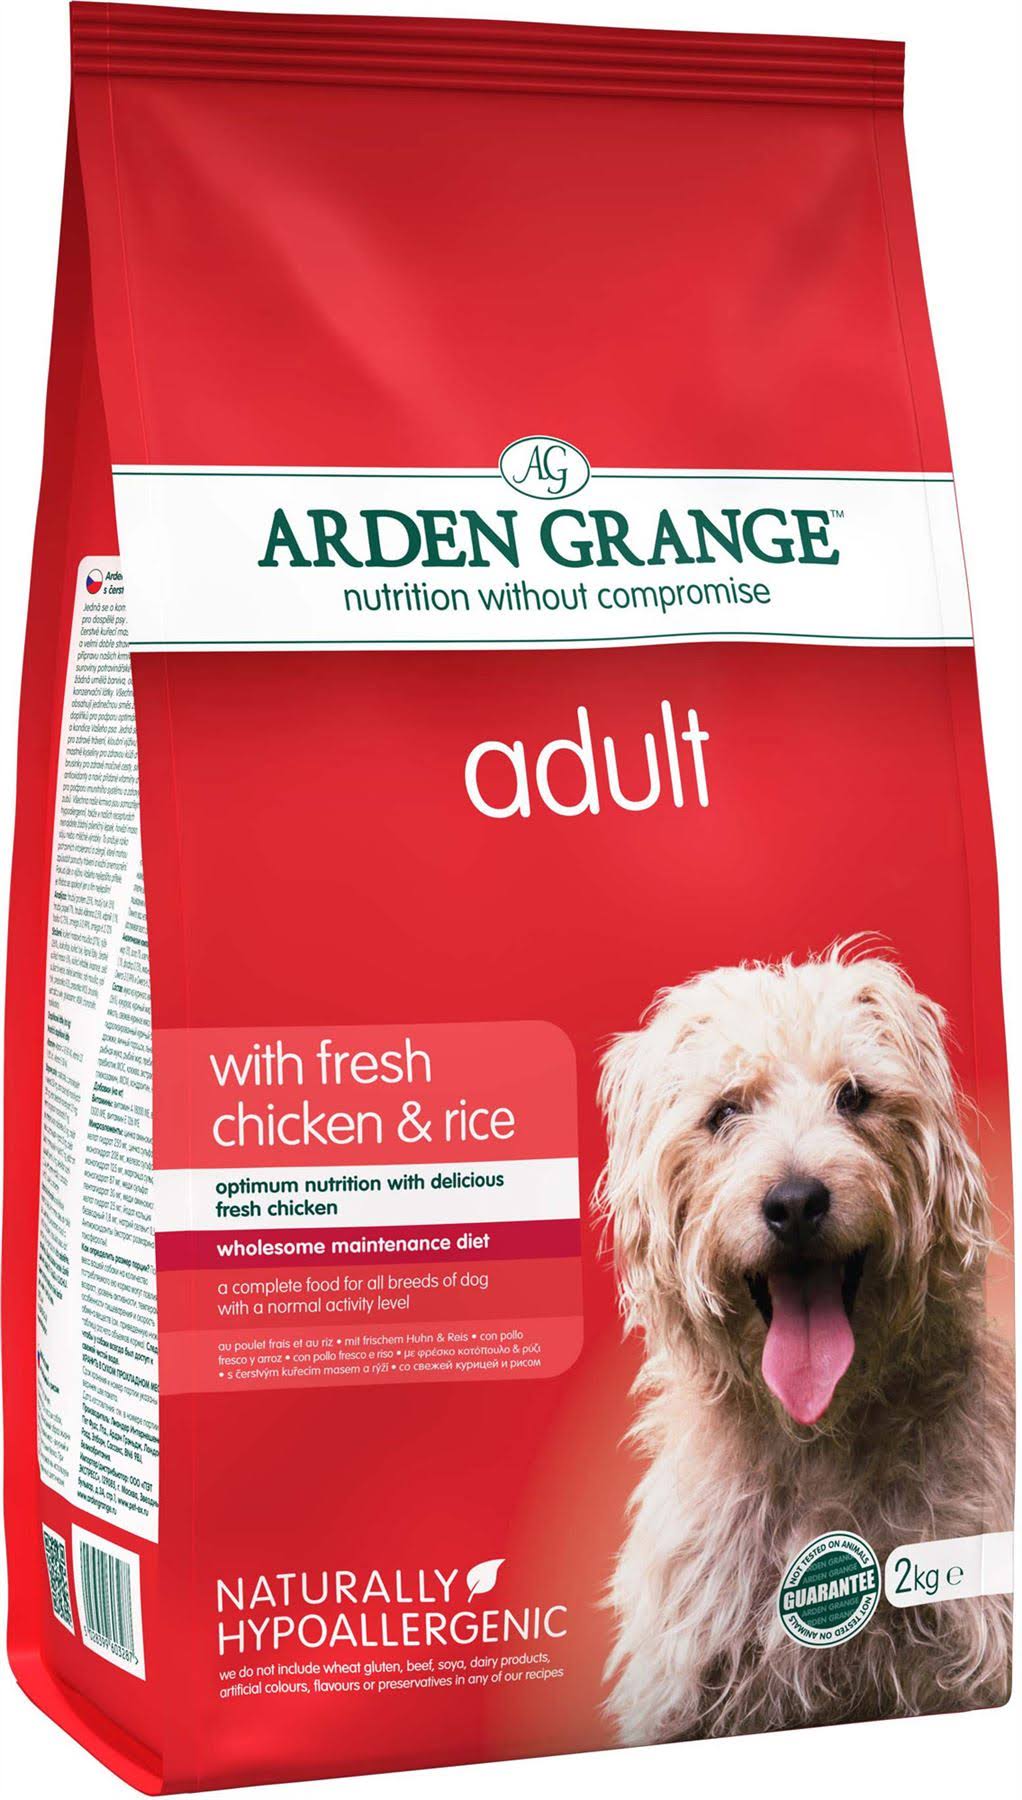 Arden Grange Dog Food - Adult, with Fresh Chicken and Rice, 2kg